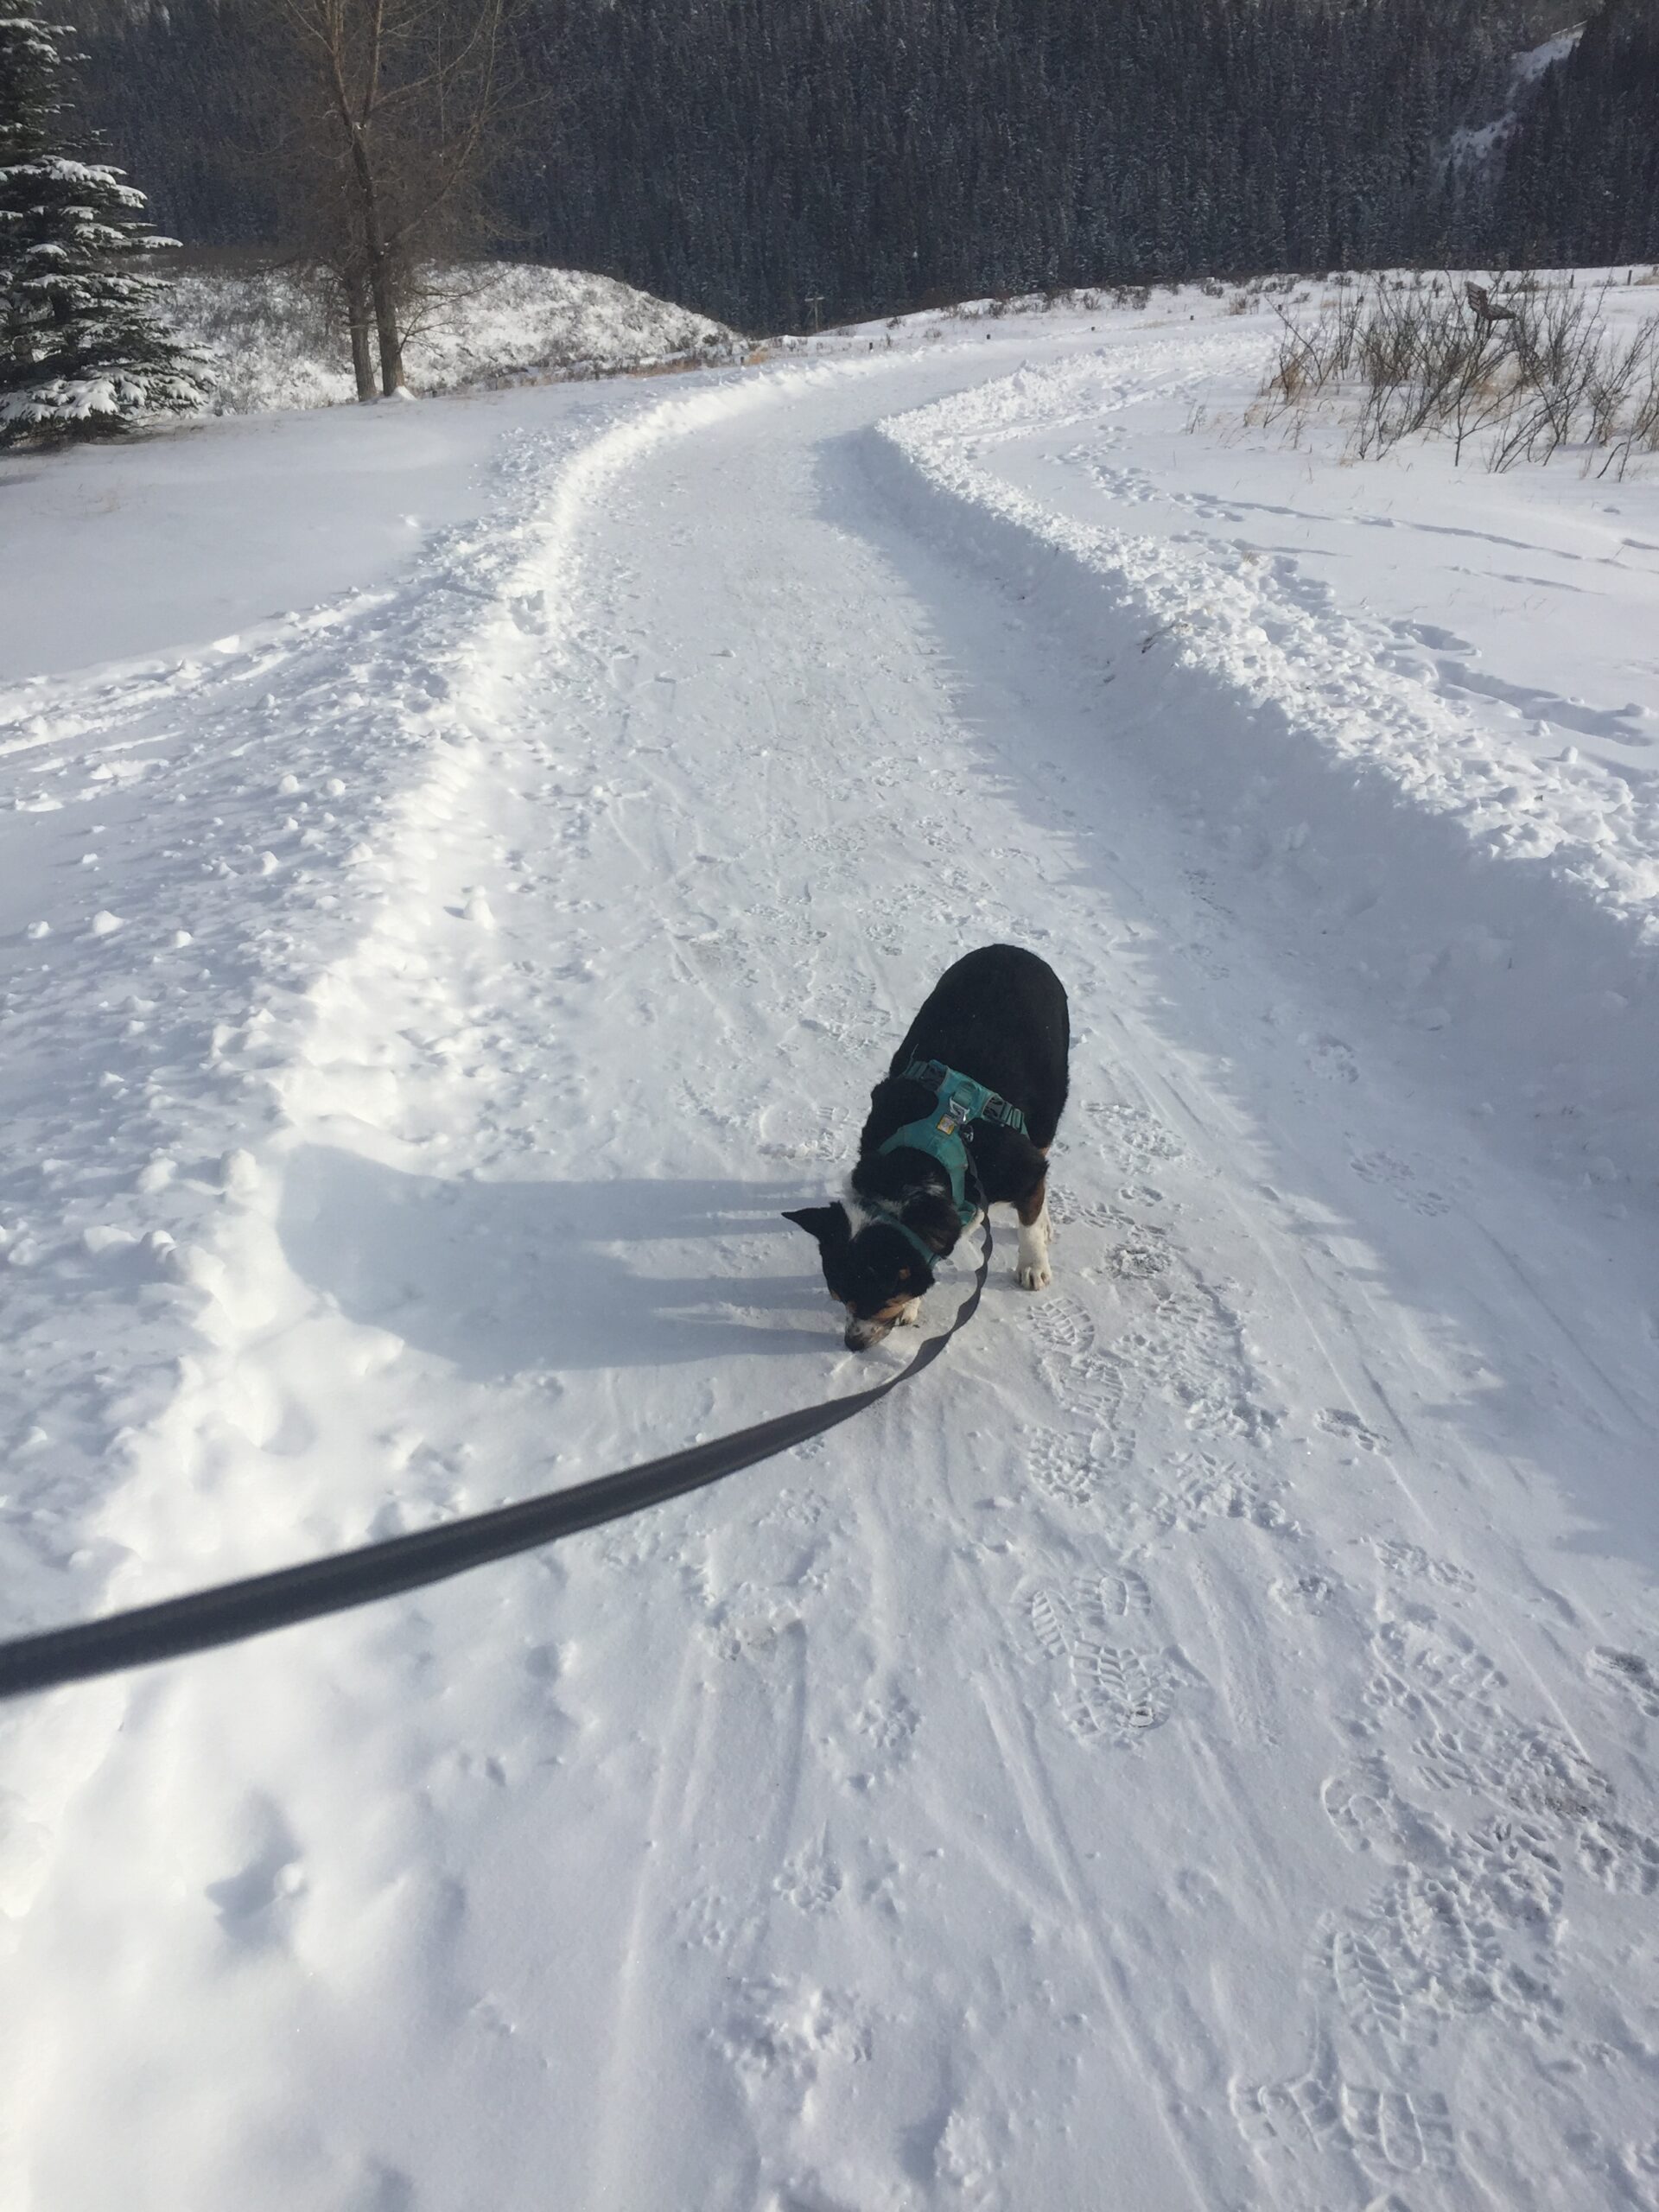 Walking with the dog on a snowy day